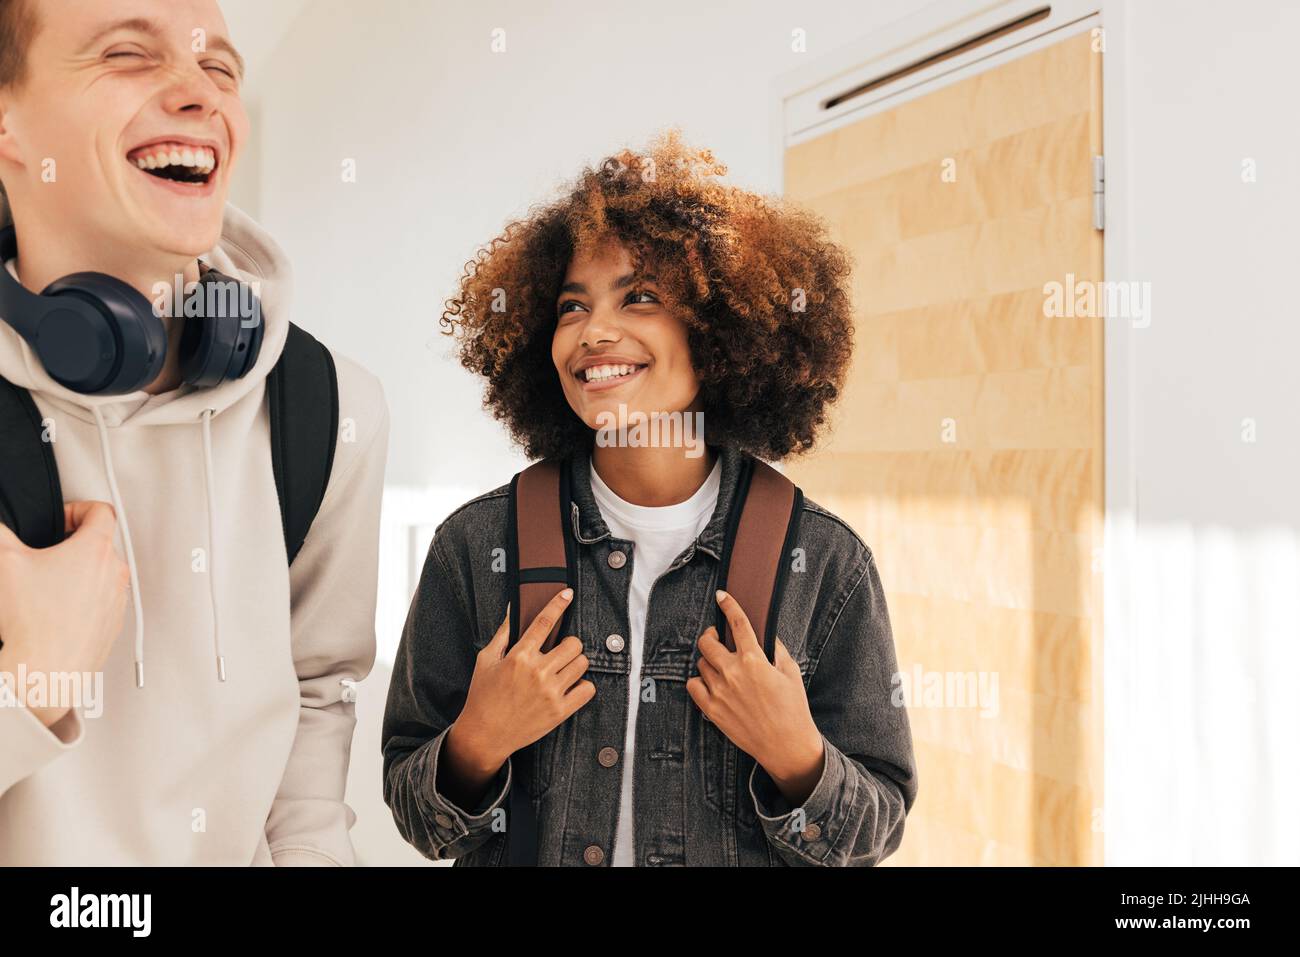 Two laughing teenagers in college. Smiling girl looking at her classmate in corridor. Stock Photo